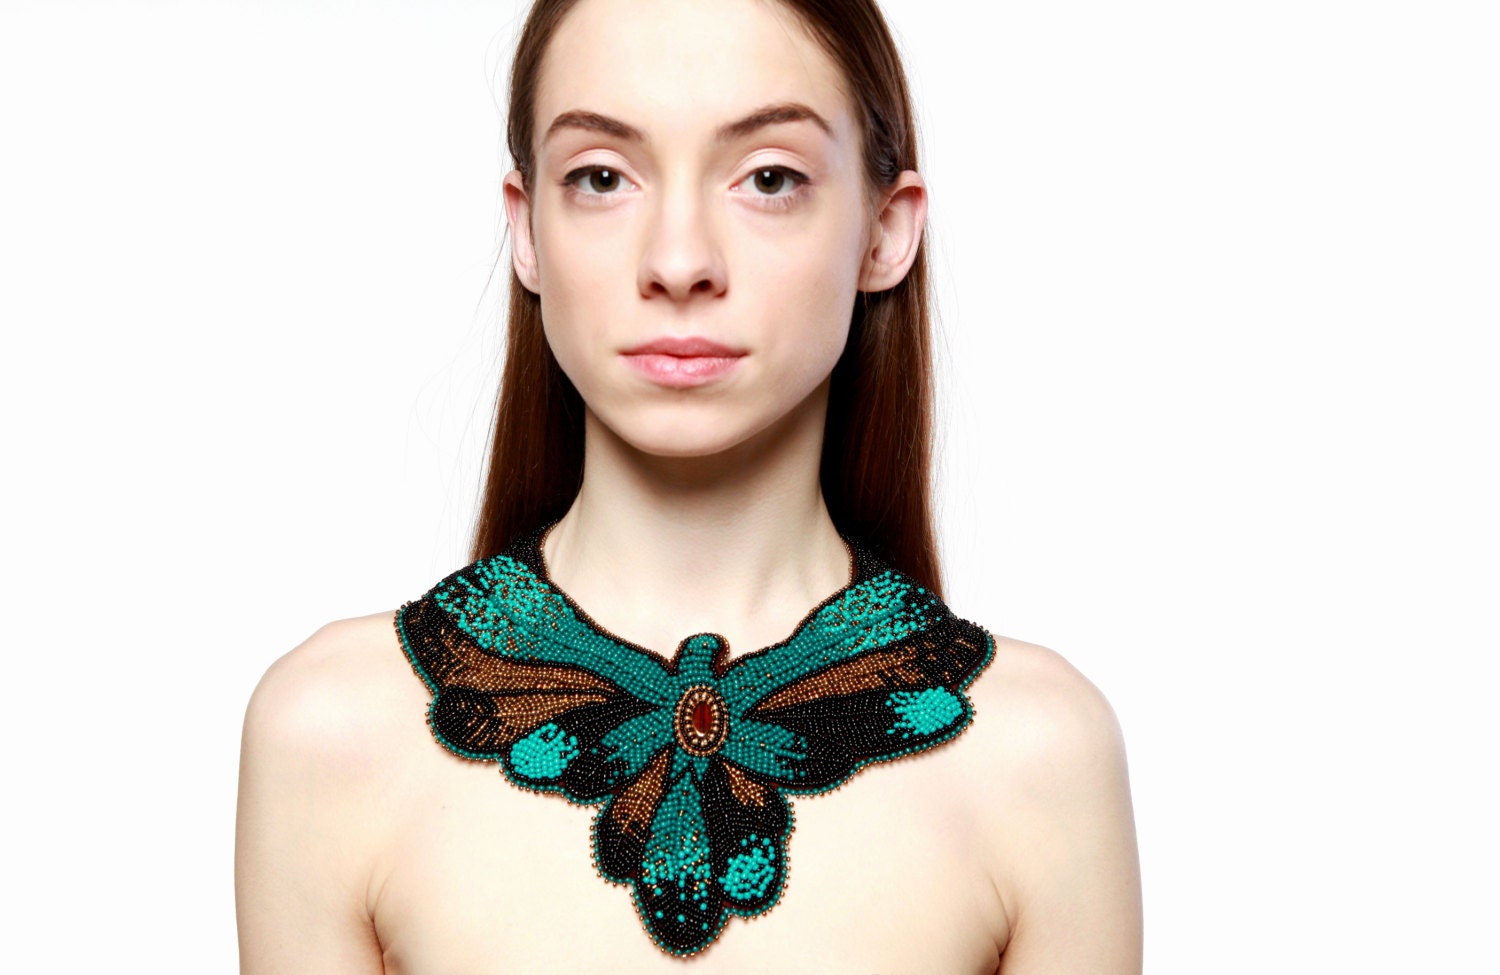 massive statement necklace collar embroidered jewelry seed ... (1500 x 975 Pixel)